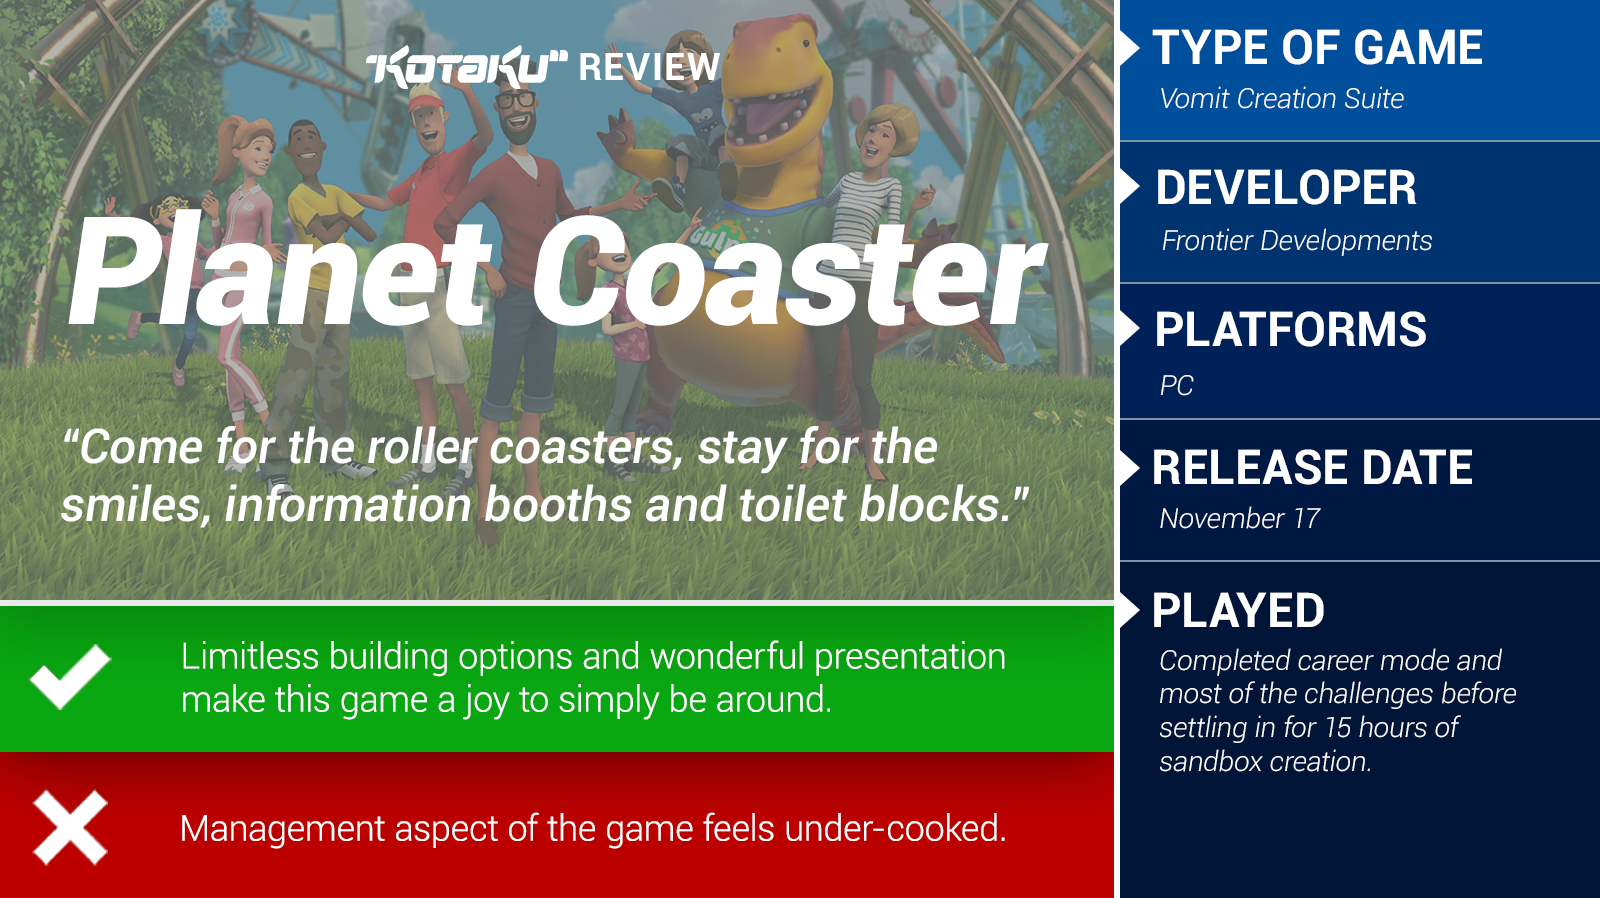 Theme Park Games – News, guides and tutorials about Theme Park Simulation  games such as, RollerCoaster Tycoon, Parkitect and Planet Coaster